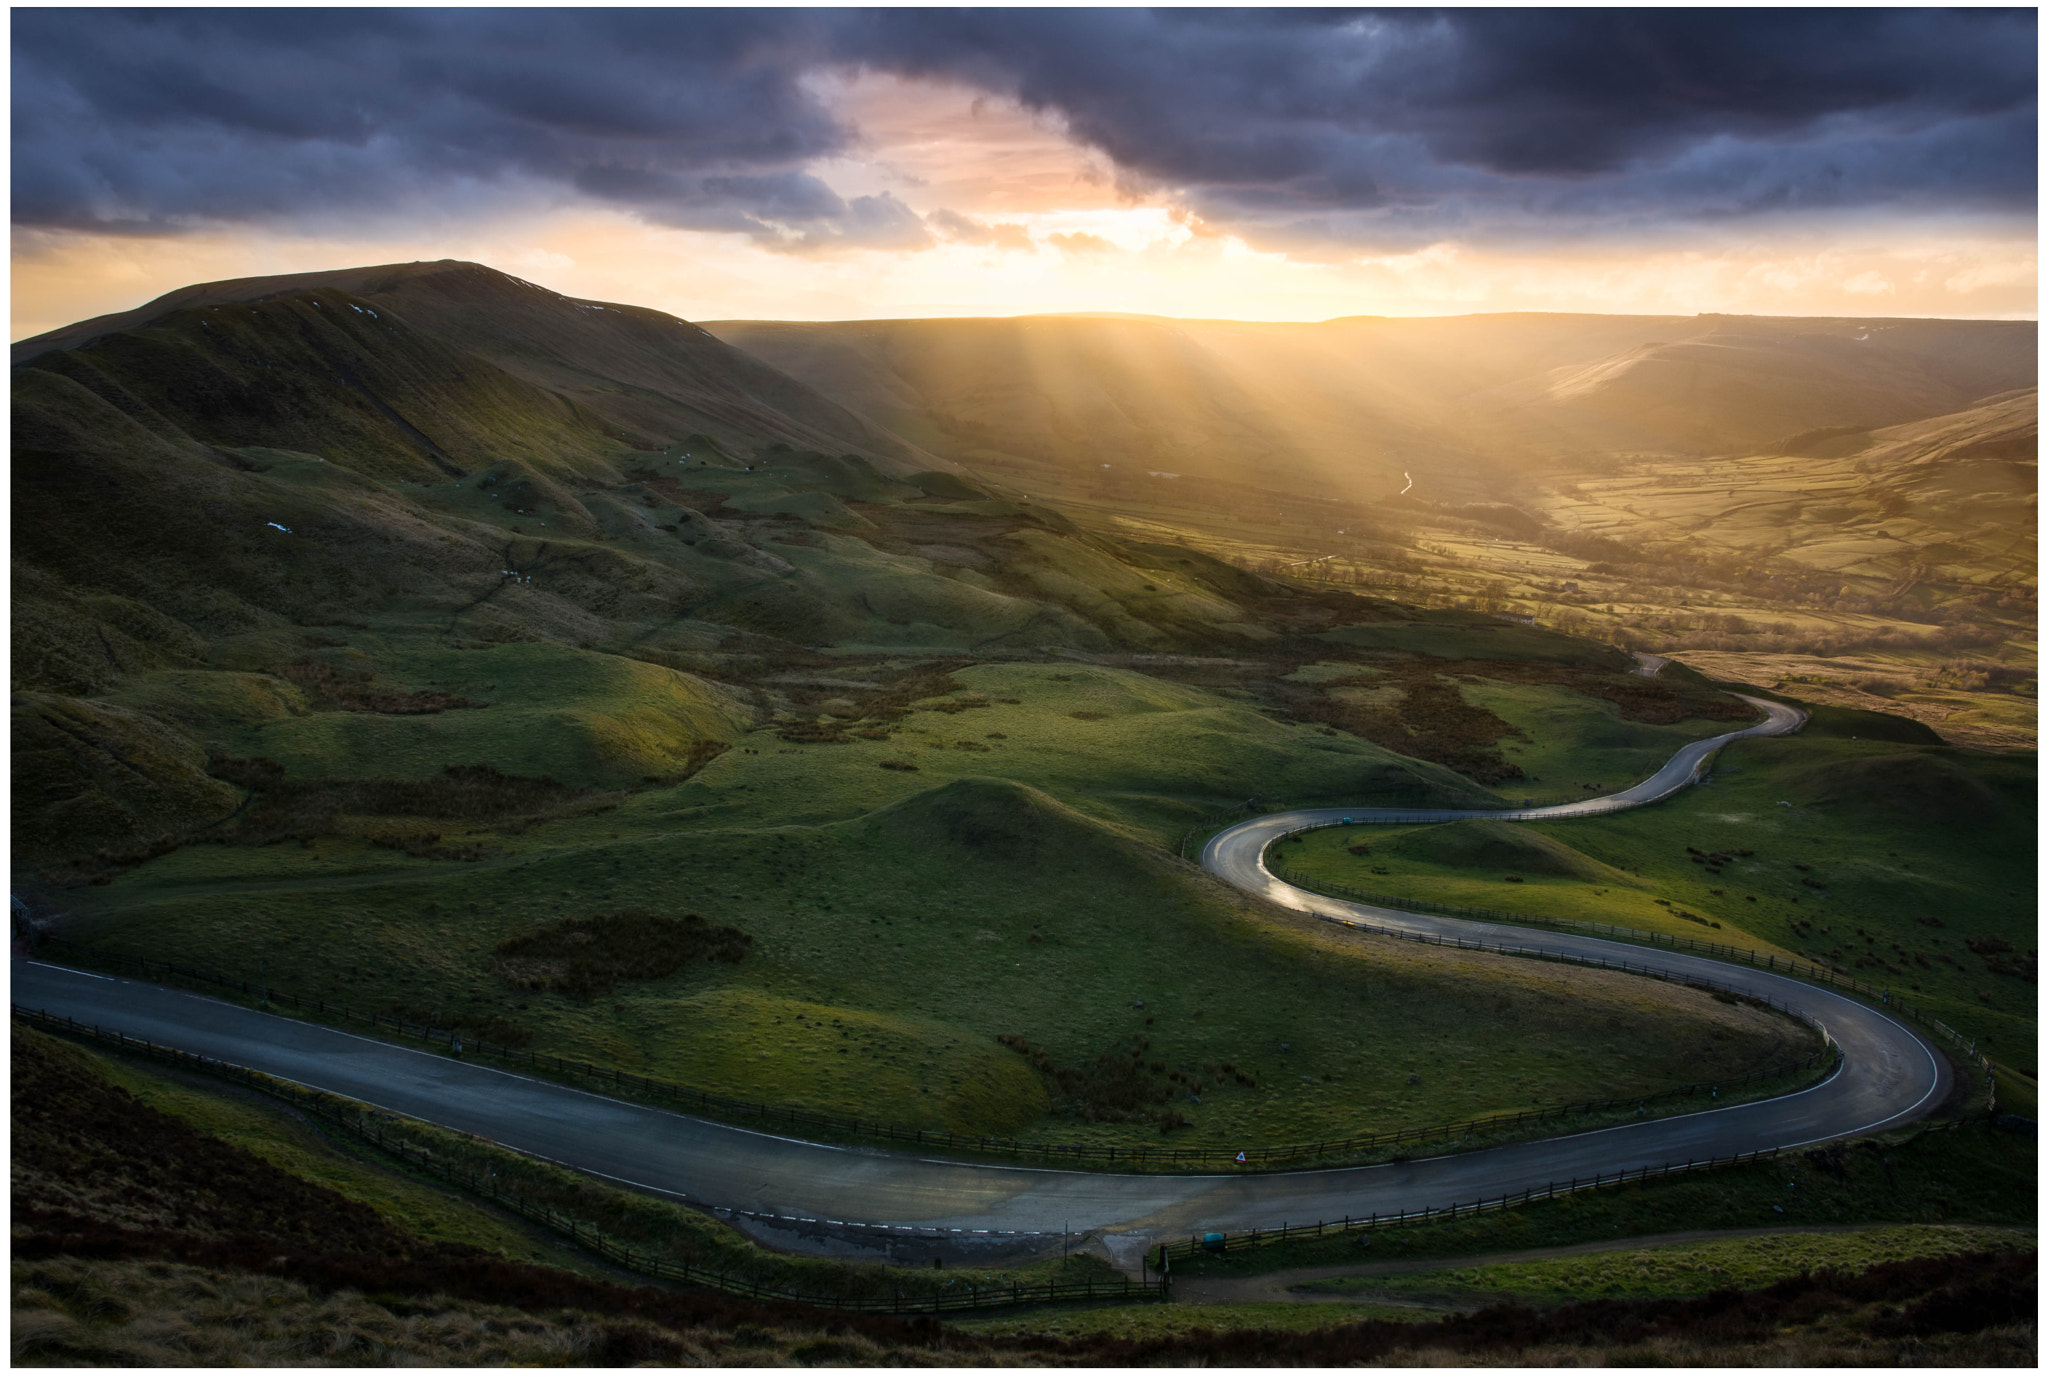 Nikon D7100 + Sigma 17-70mm F2.8-4 DC Macro OS HSM | C sample photo. Edale storms approach photography